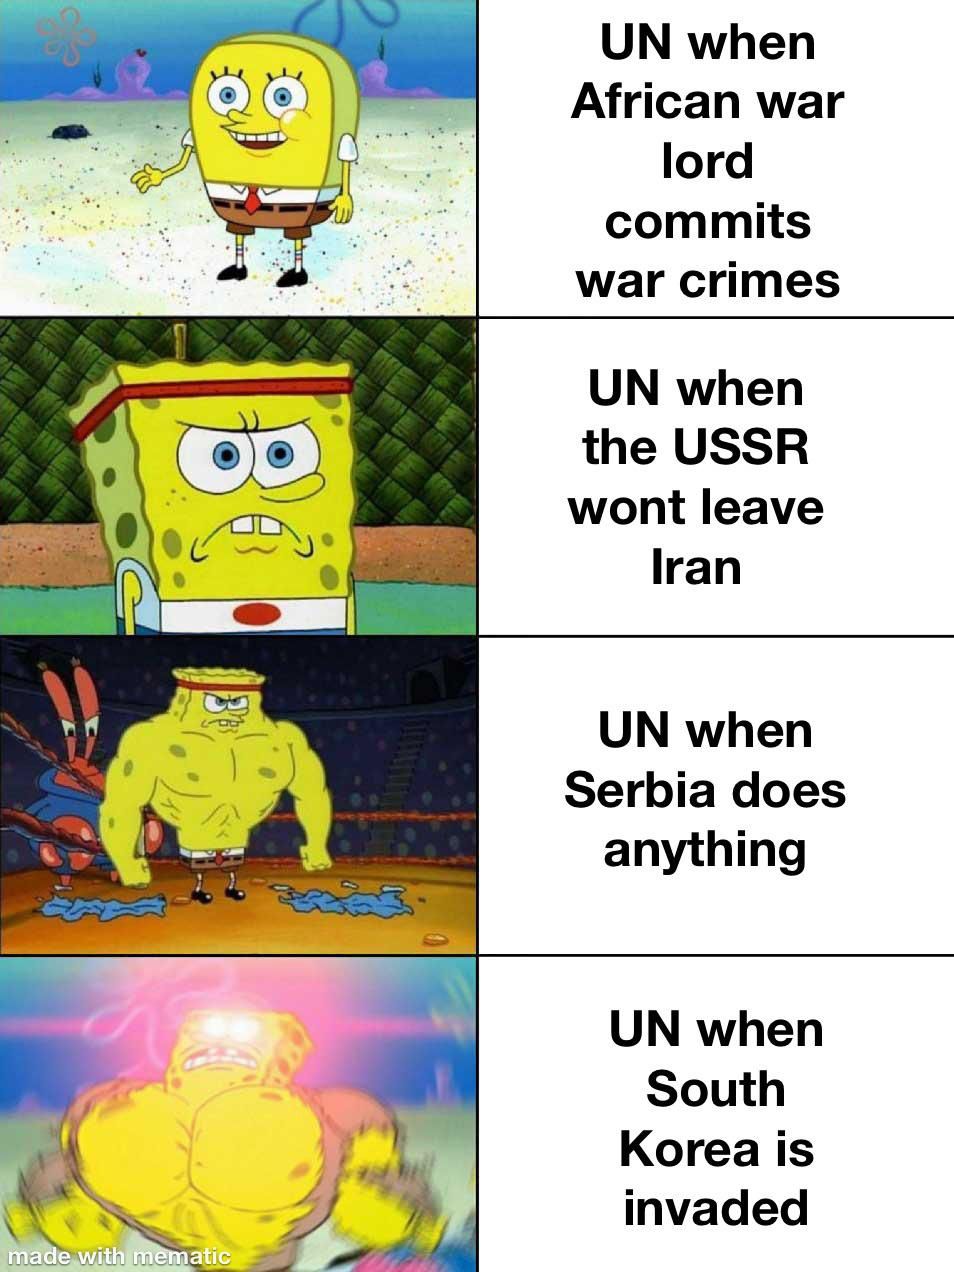 No one touches South Korea without the UN knowing